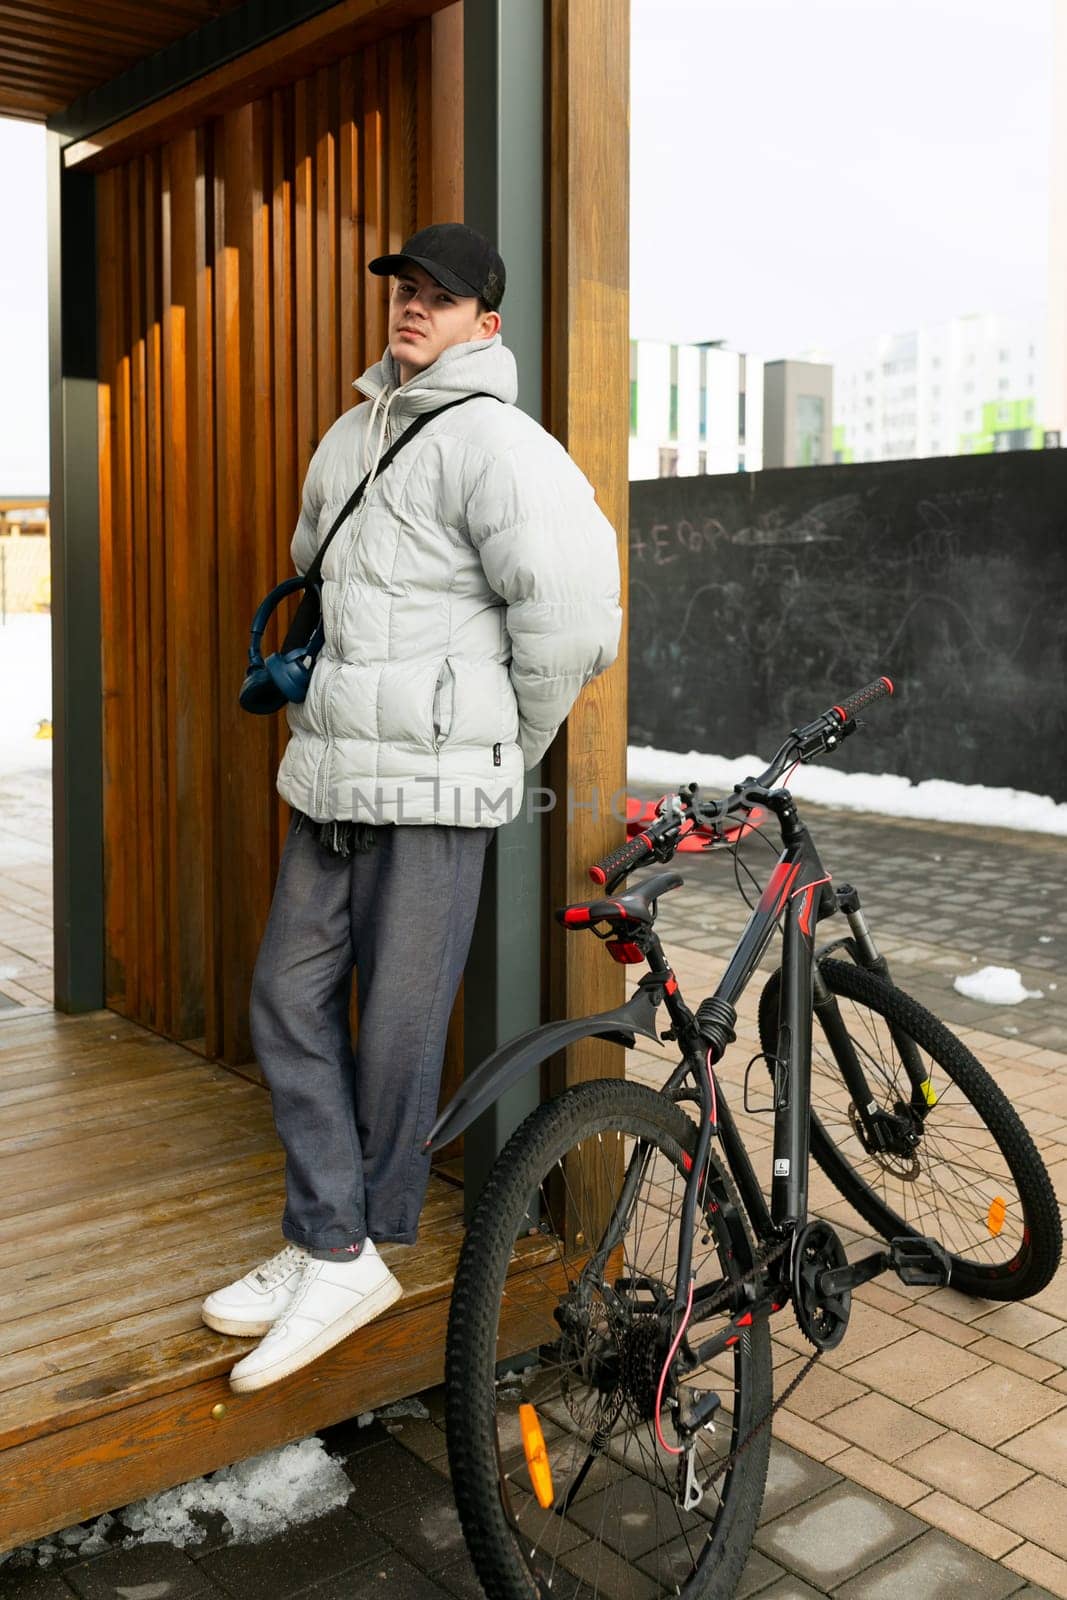 A man in a cap and a warm jacket stands with a rental bicycle by TRMK